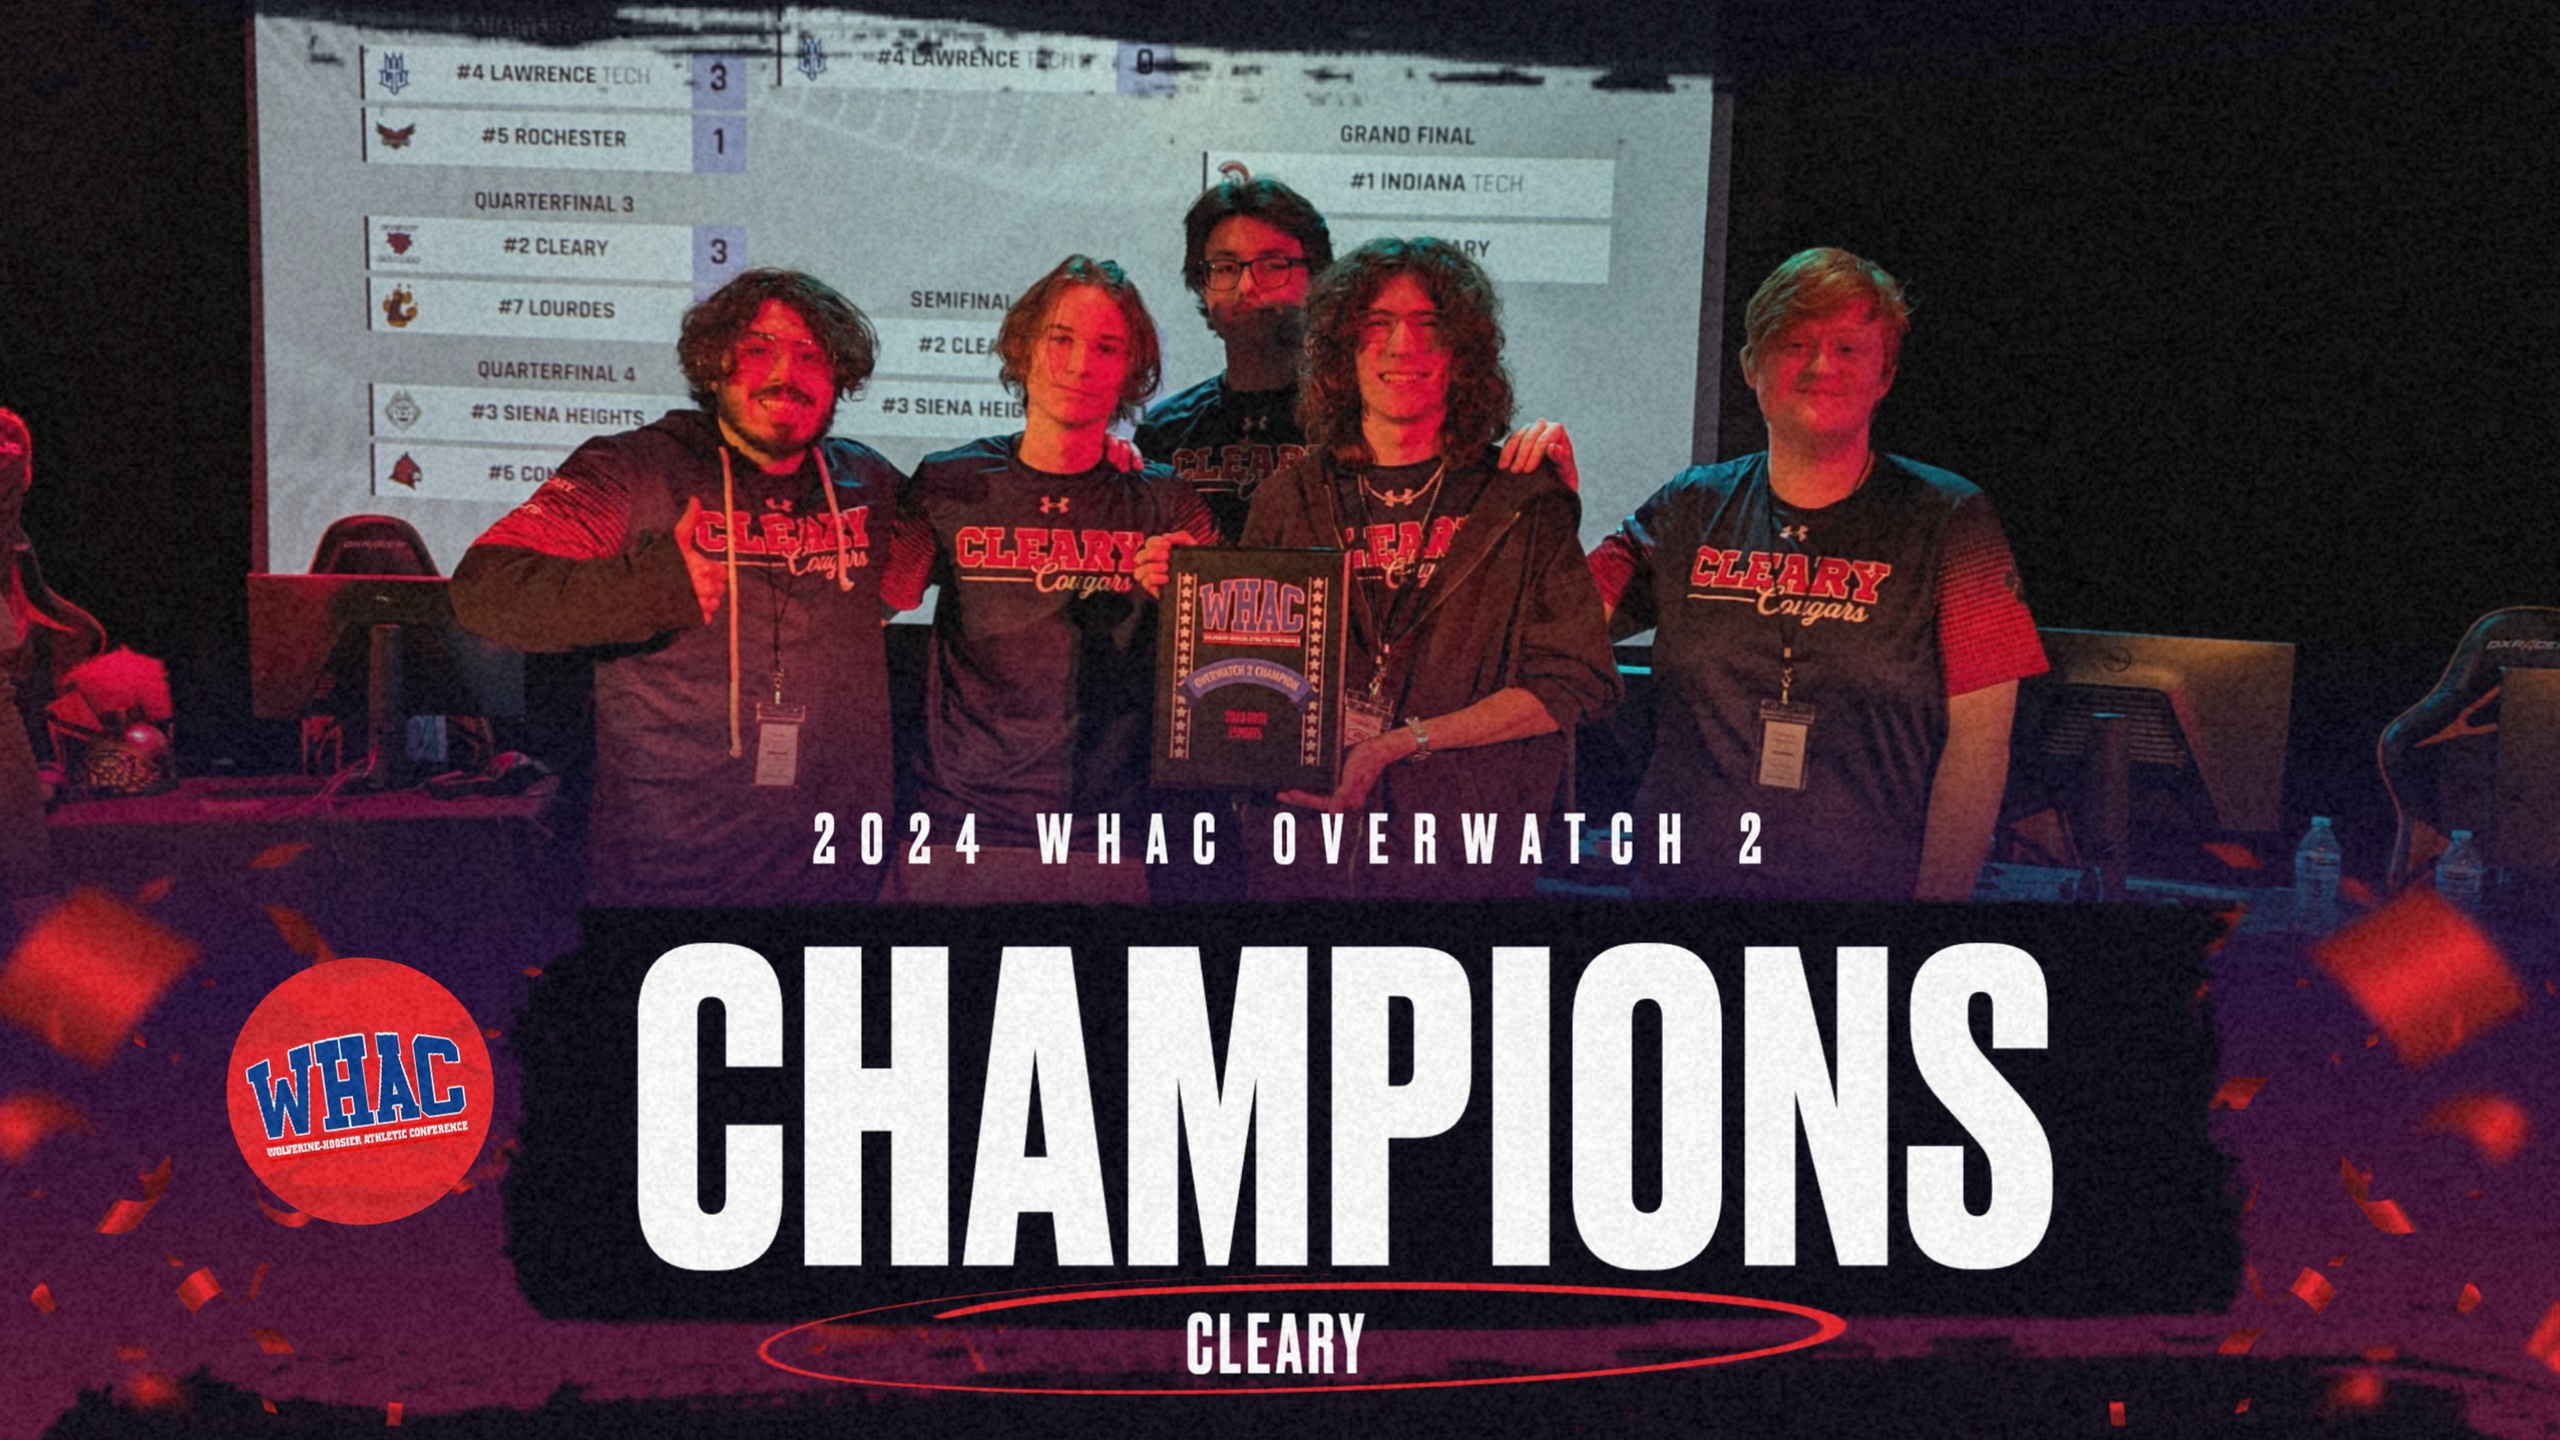 Cleary wins 2024 Overwatch 2 Championship